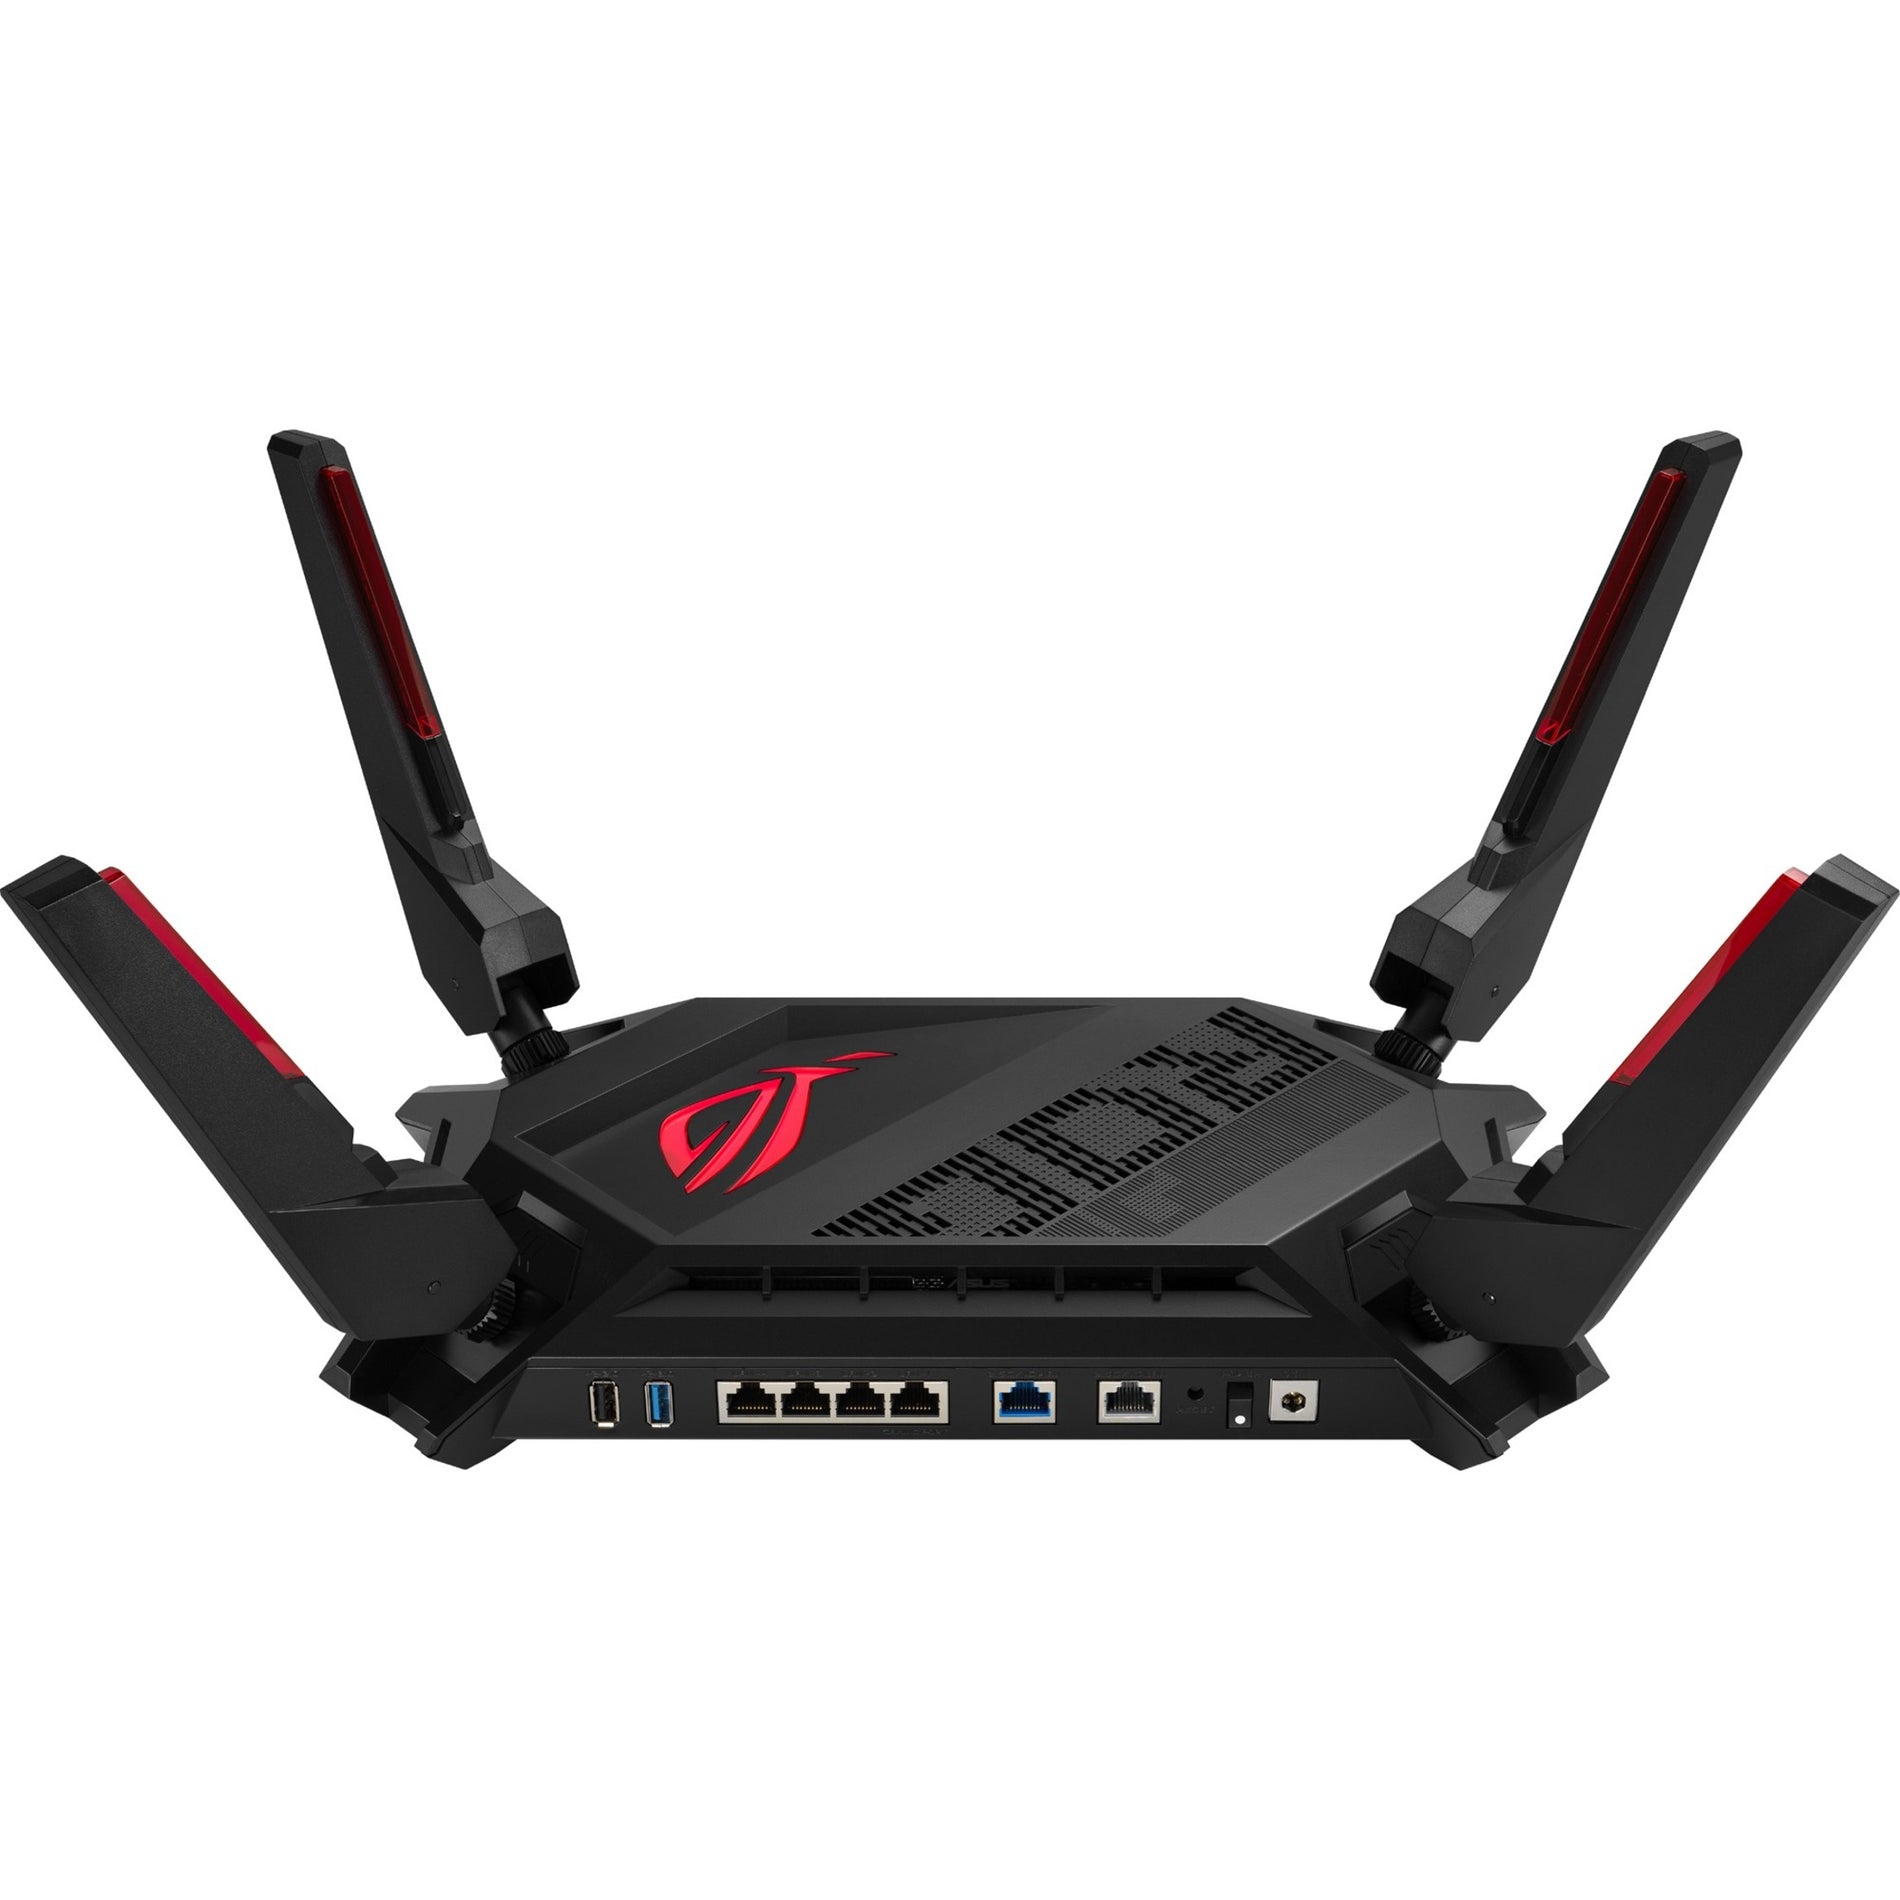 Asus ROG GT-AX6000 Rapture Wireless Router, Wi-Fi 6, 2.5 Gigabit Ethernet, 744 MB/s